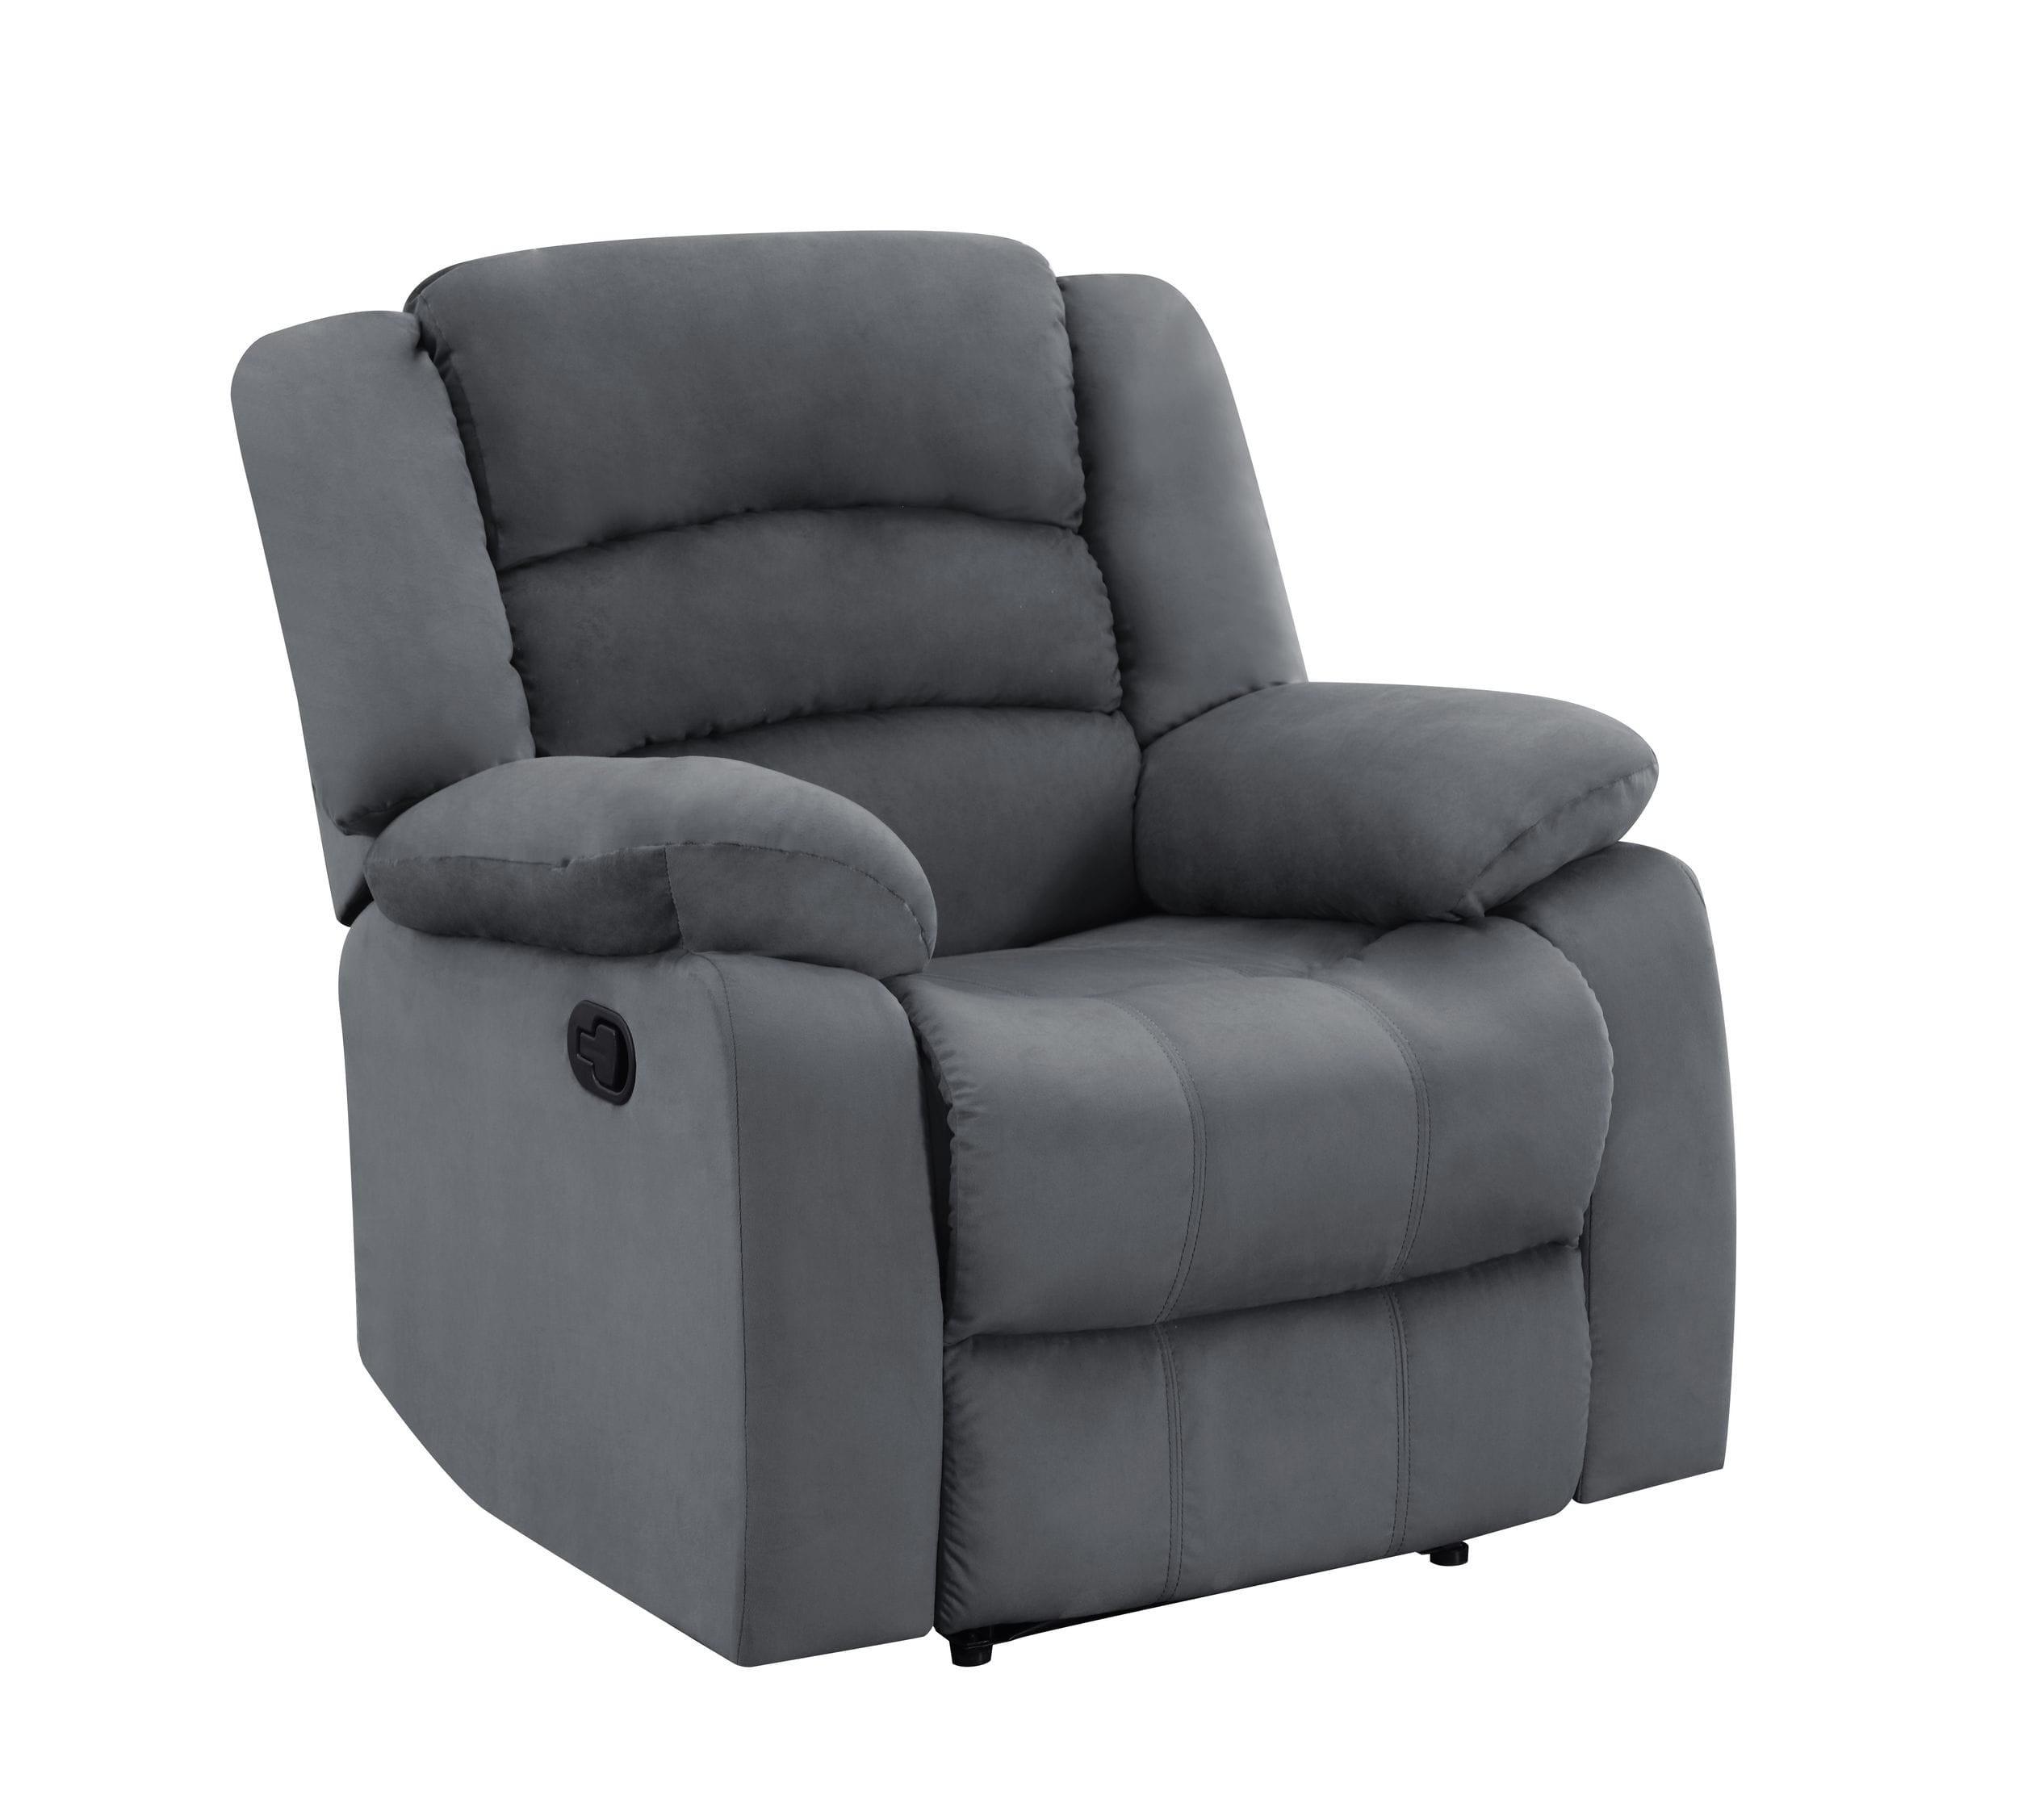 Contemporary Recliner Chair 9824 9824-GRAY-CH in Gray Microfiber